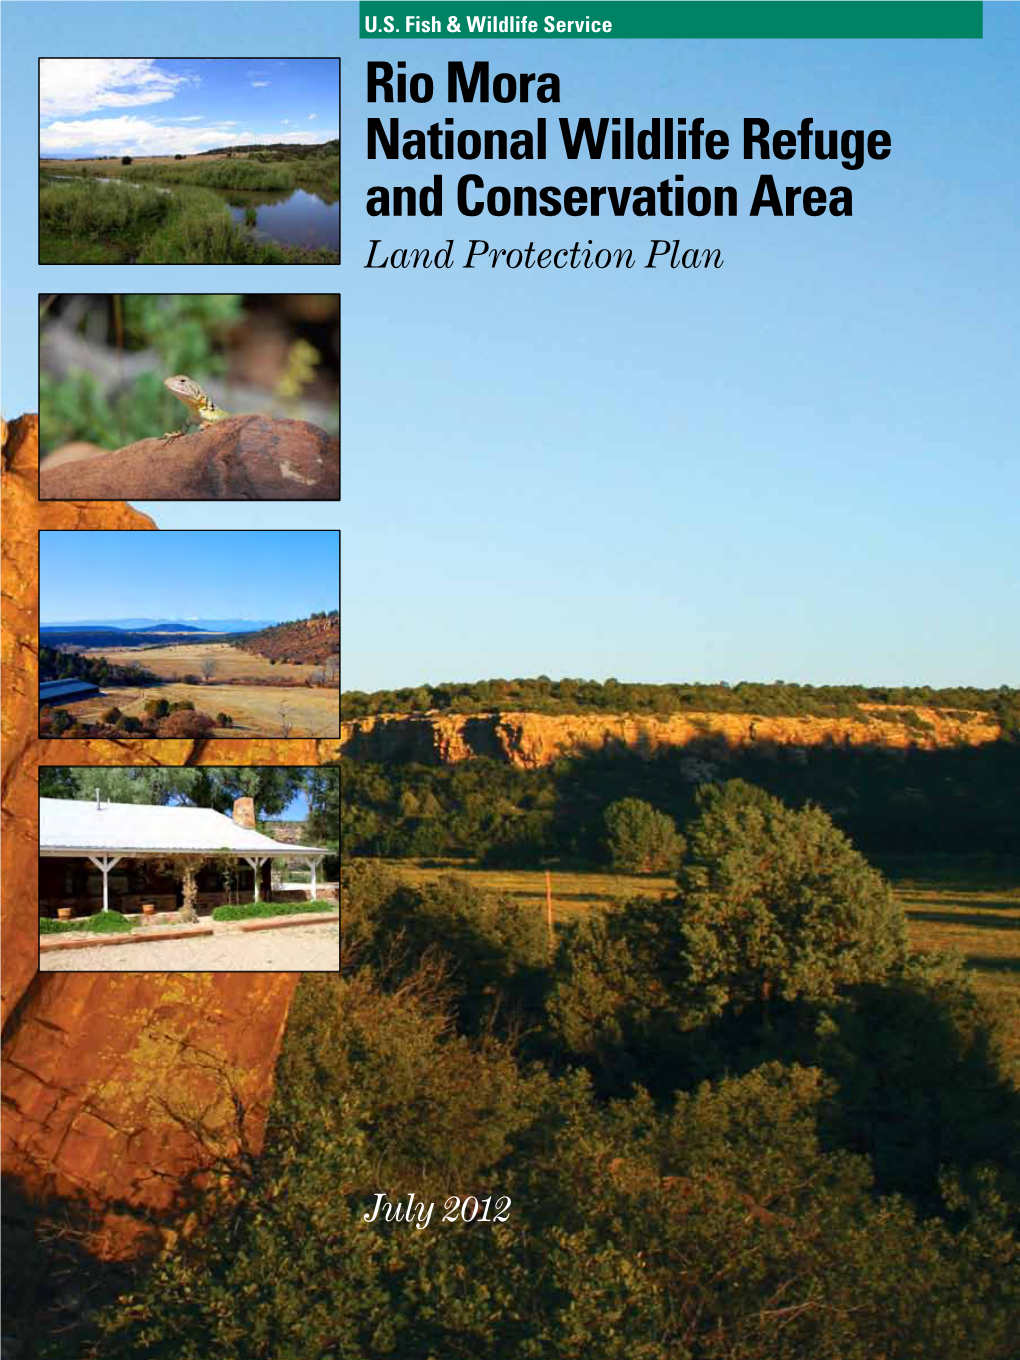 Rio Mora National Wildlife Refuge and Conservation Area Land Protection Plan